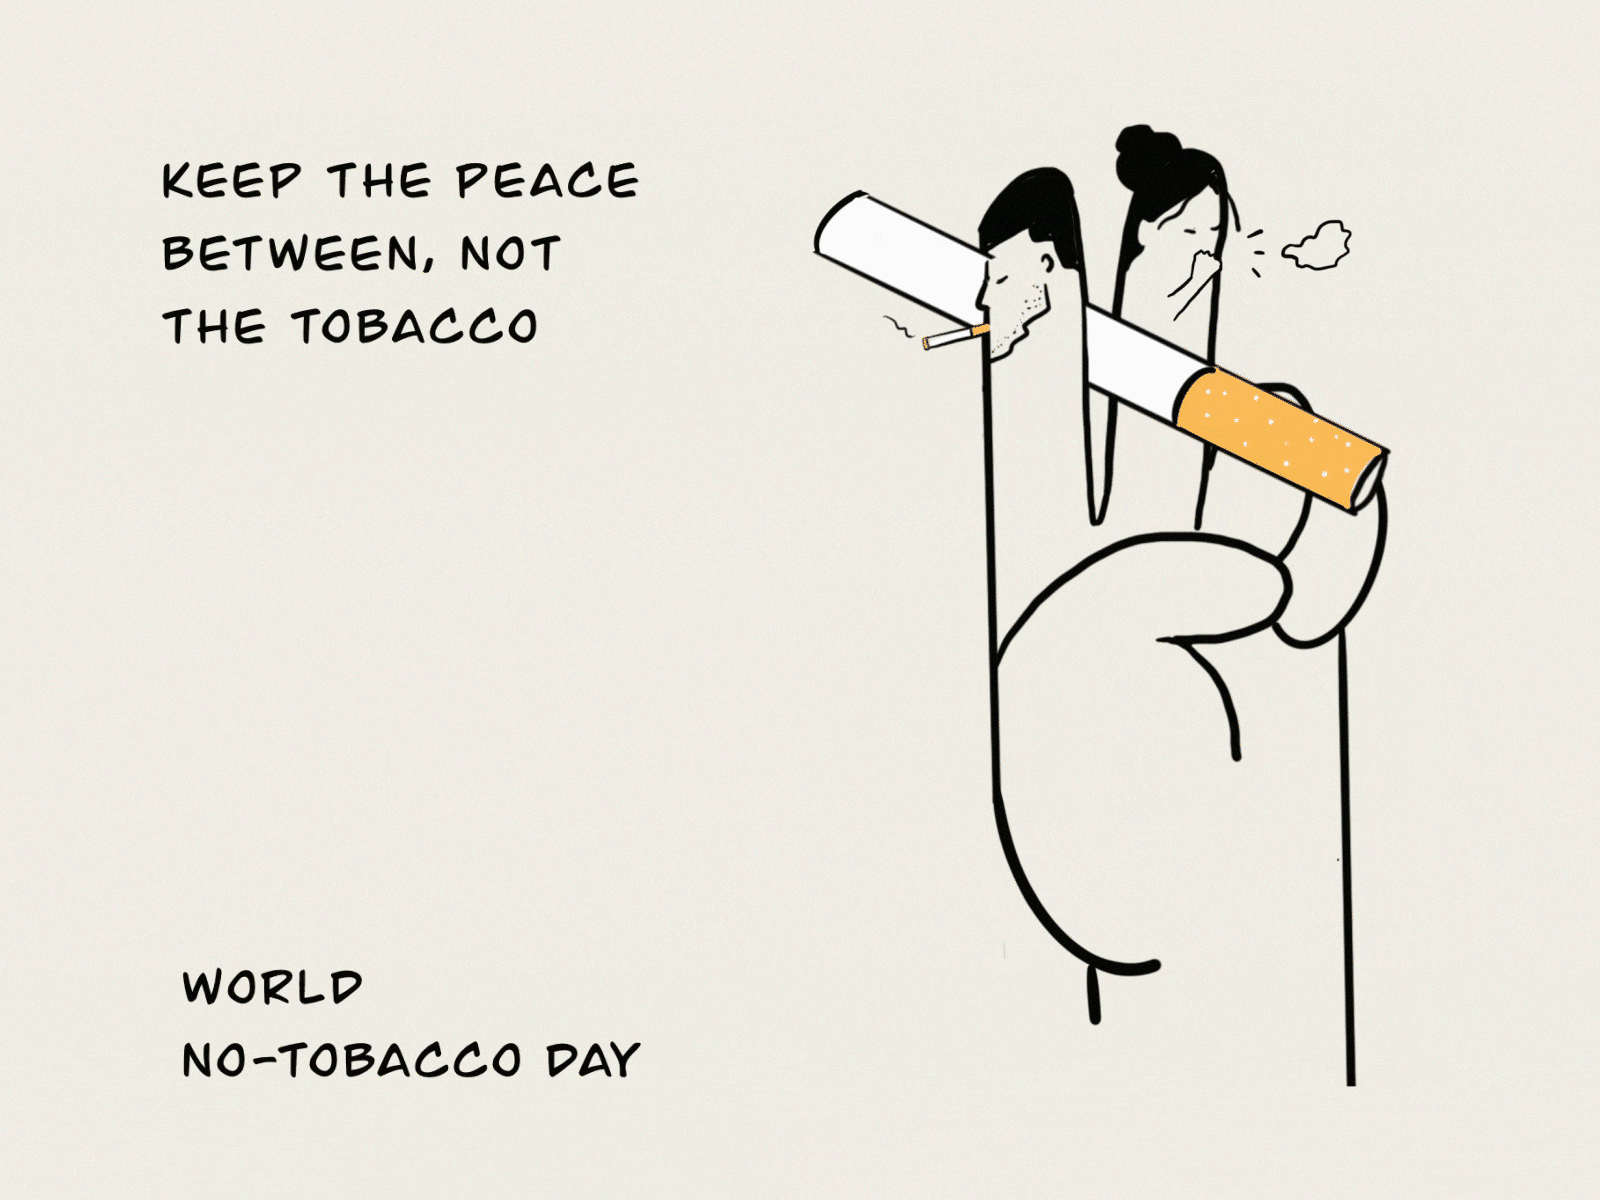 Keep the peace between, not the tobacco